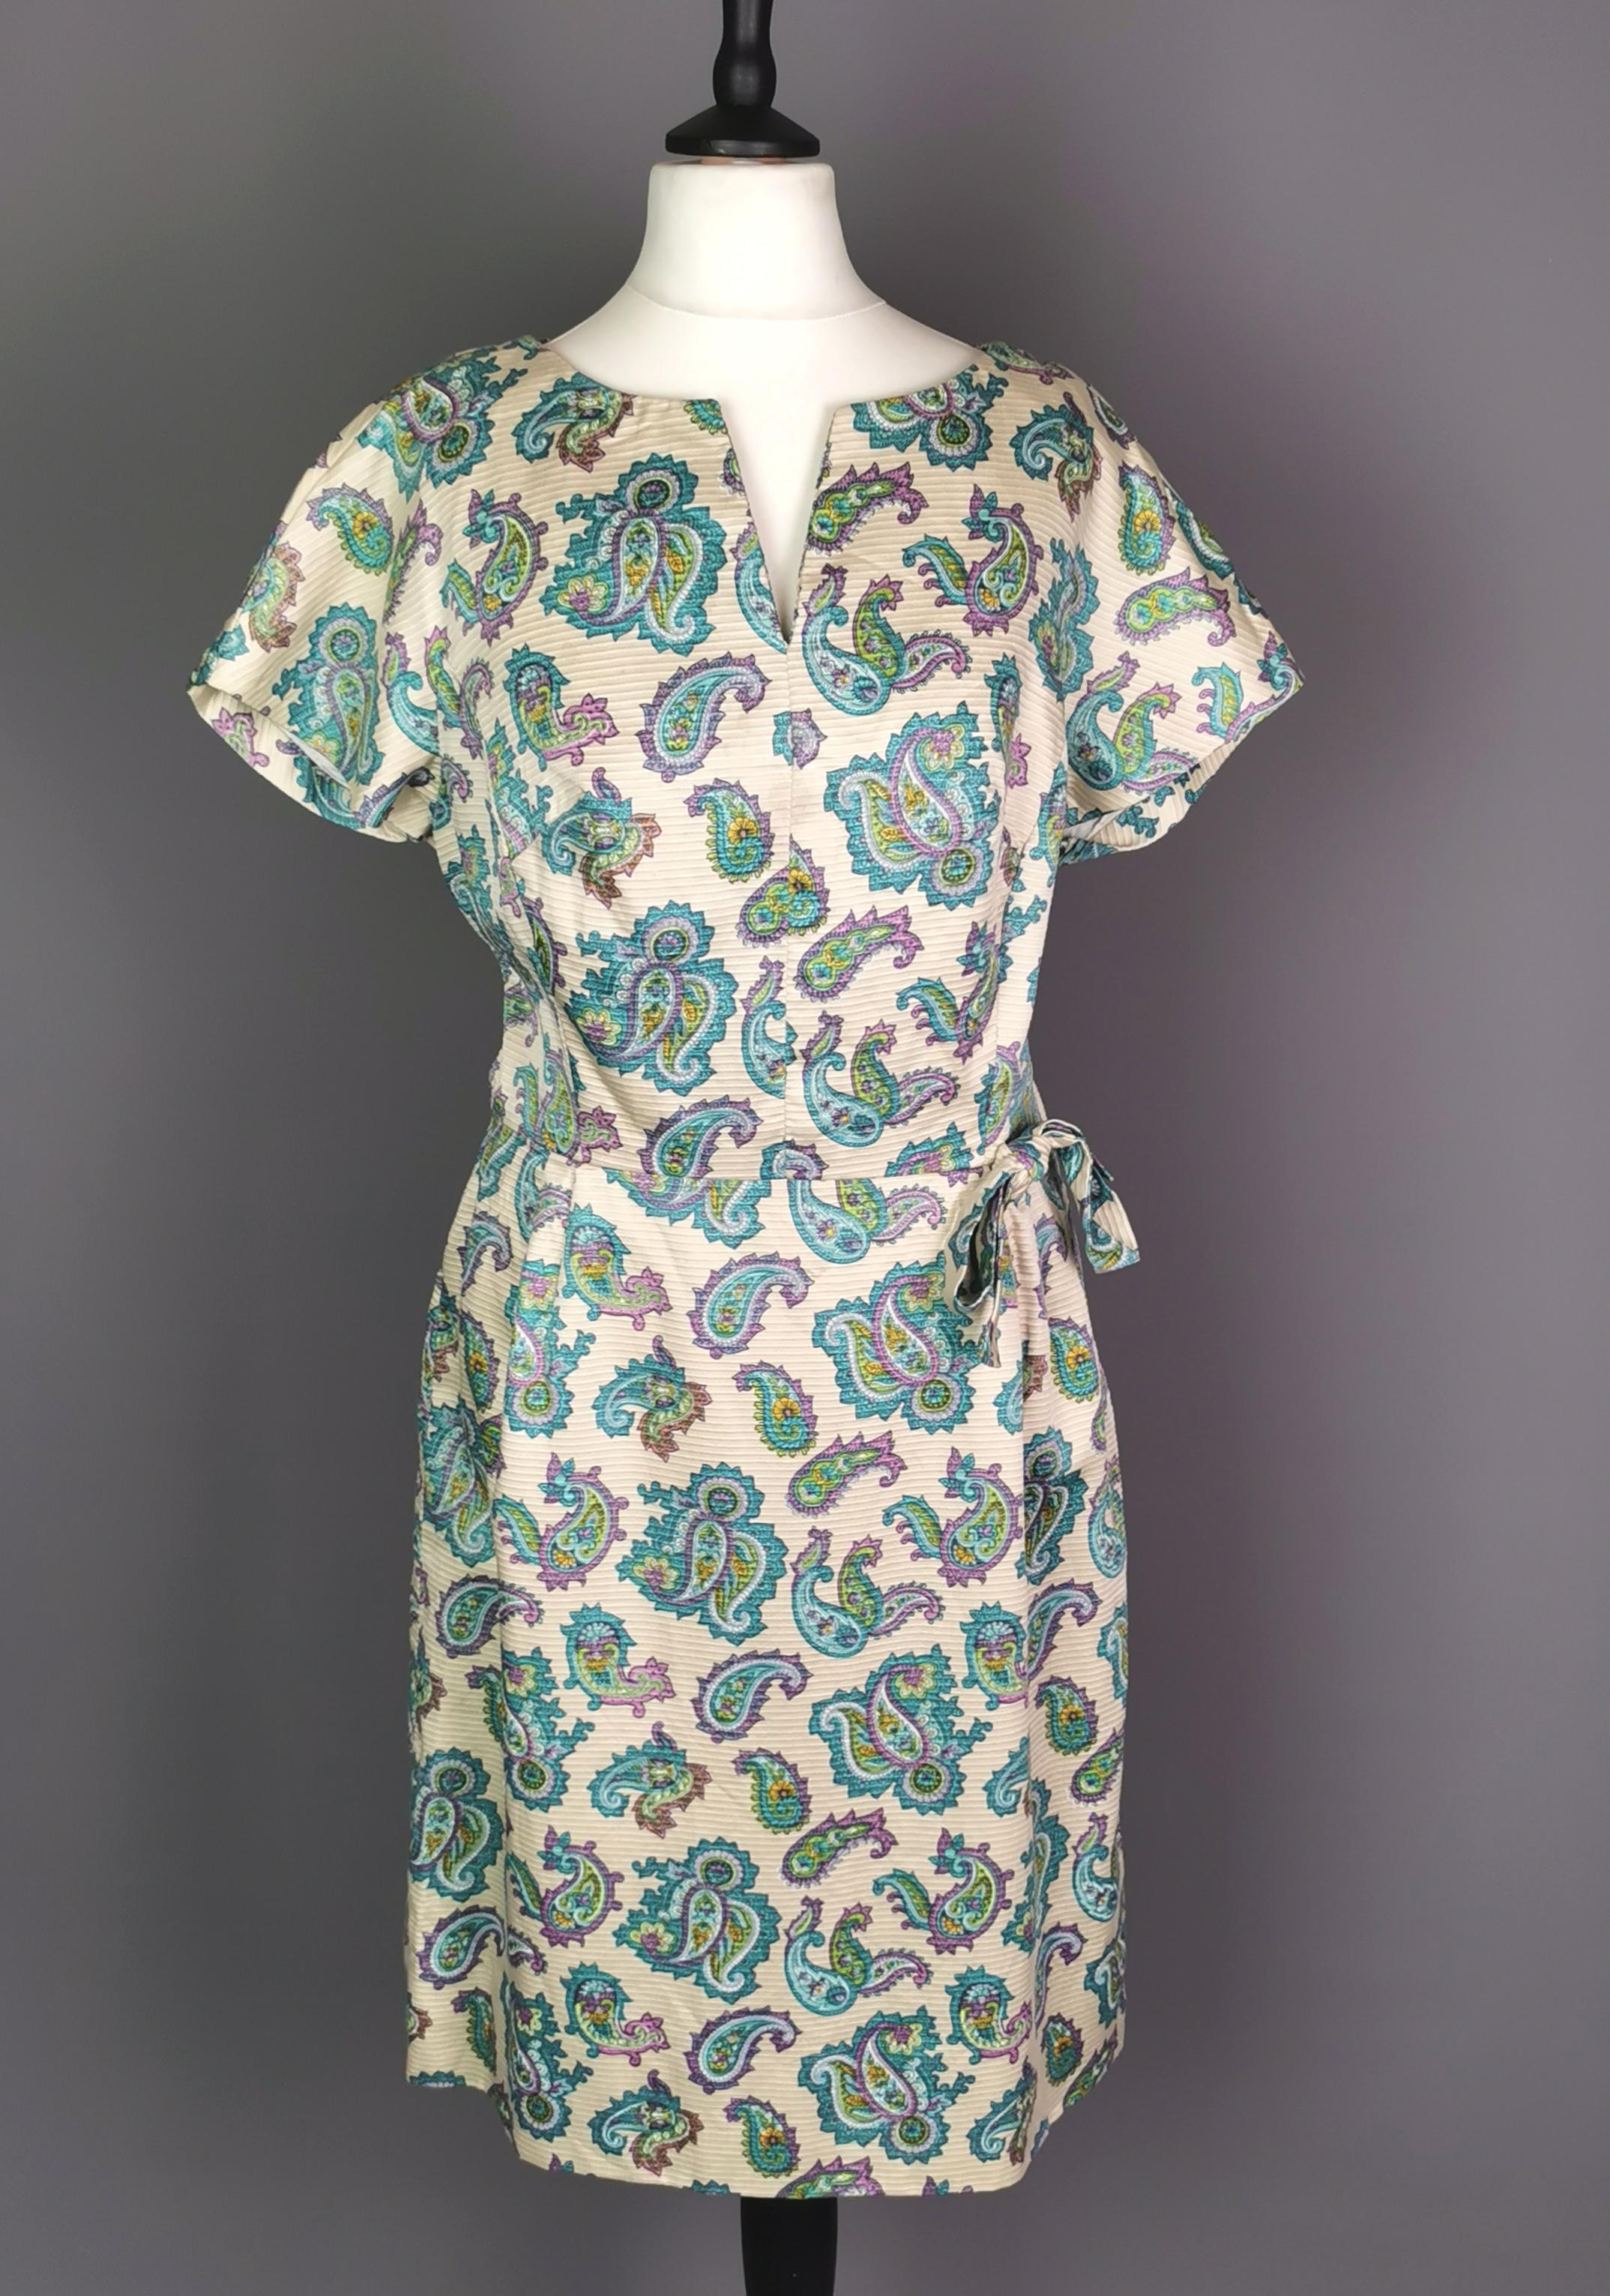 A fantastic vintage late c1960s paisley print mini dress.

It is made from a synthetic rayon satin blend, nipped in slightly at the waist with a fairly straight cut skirt in a vibrant paisley pattern on a dark cream ground, very colourful.

It has a